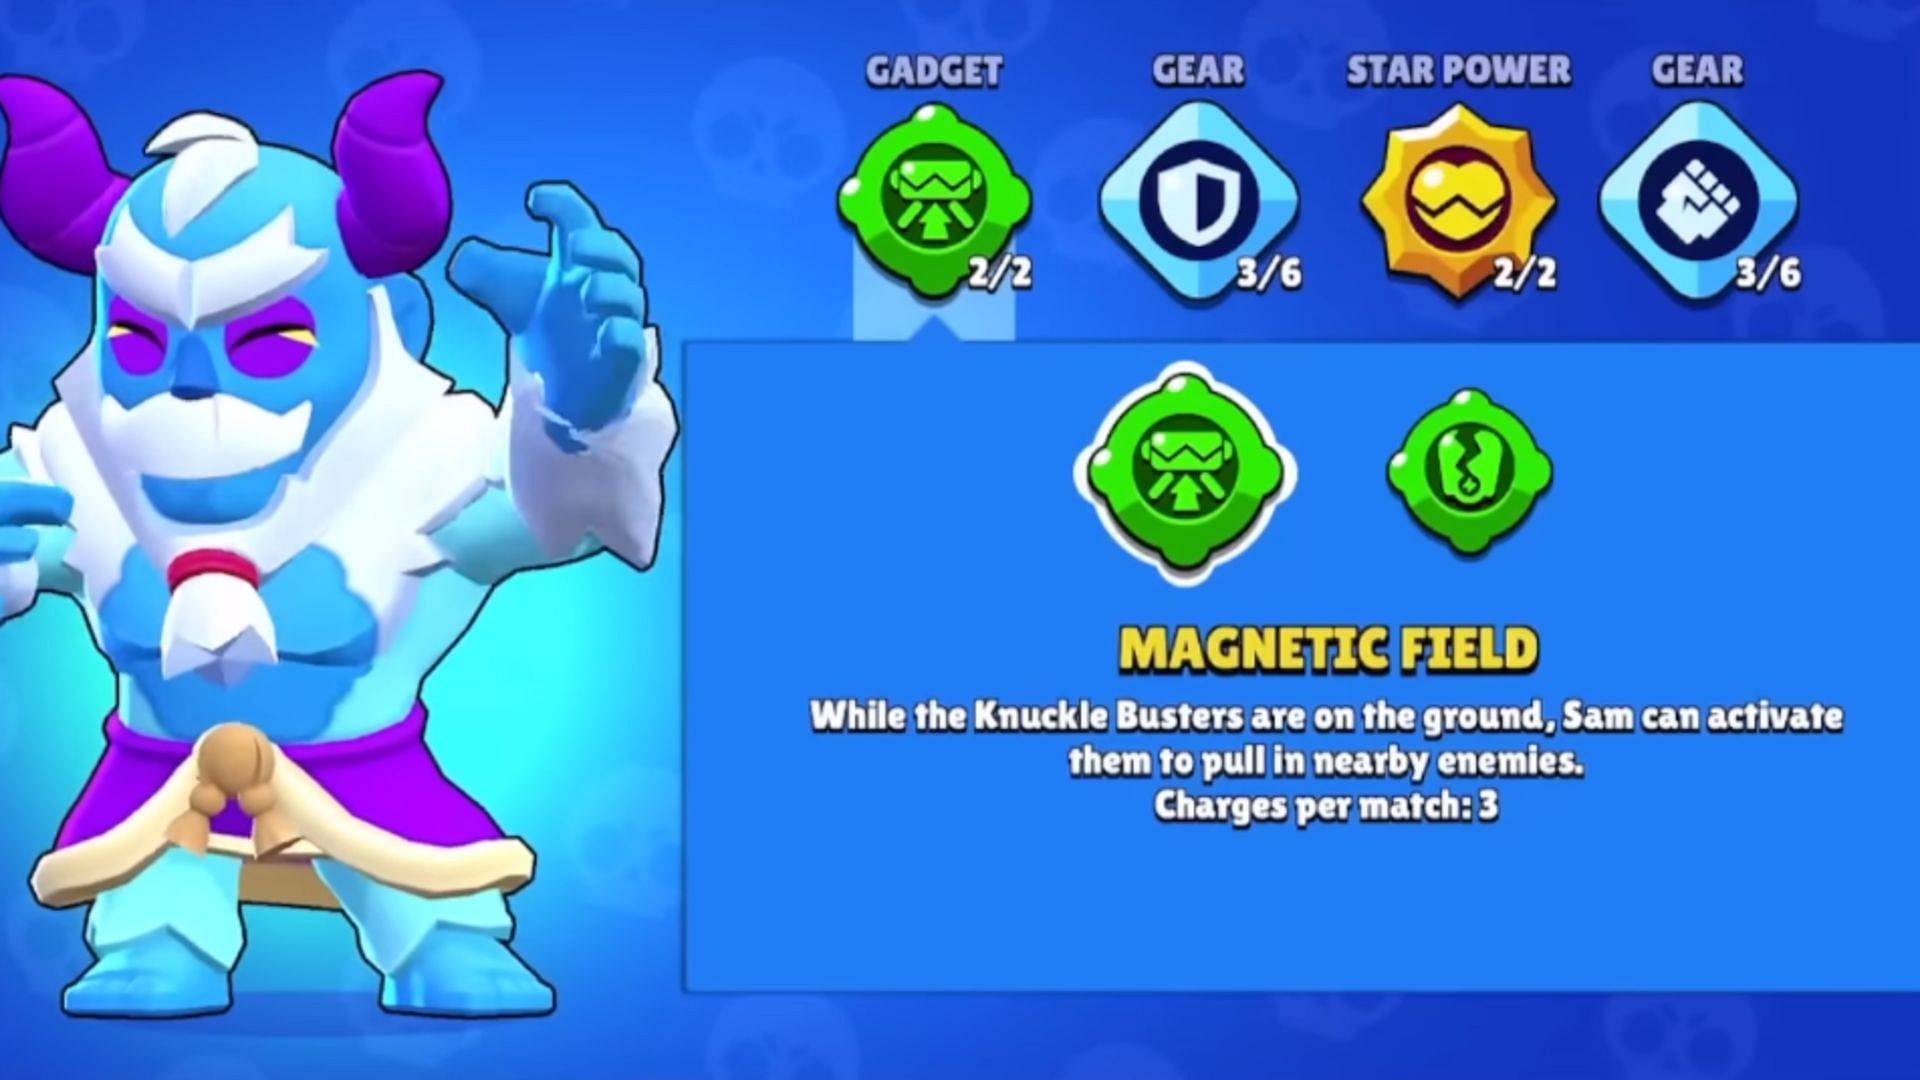 Magnetic Field Gadget (Image via Supercell)